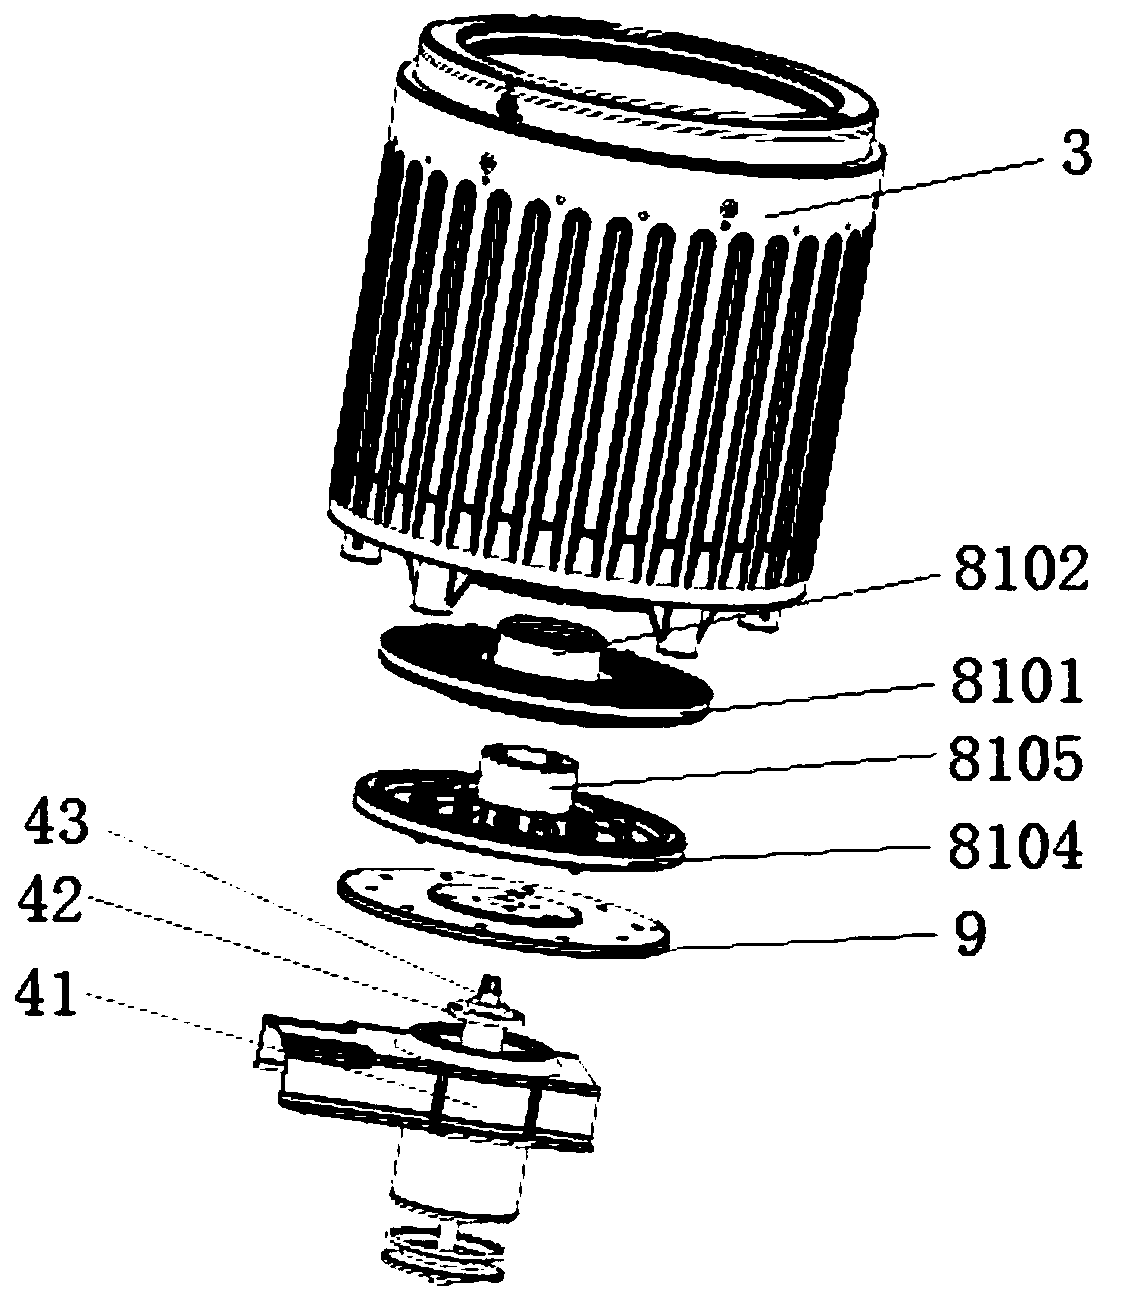 Full-automatic washing machine provided with rapidly detachable inner drums